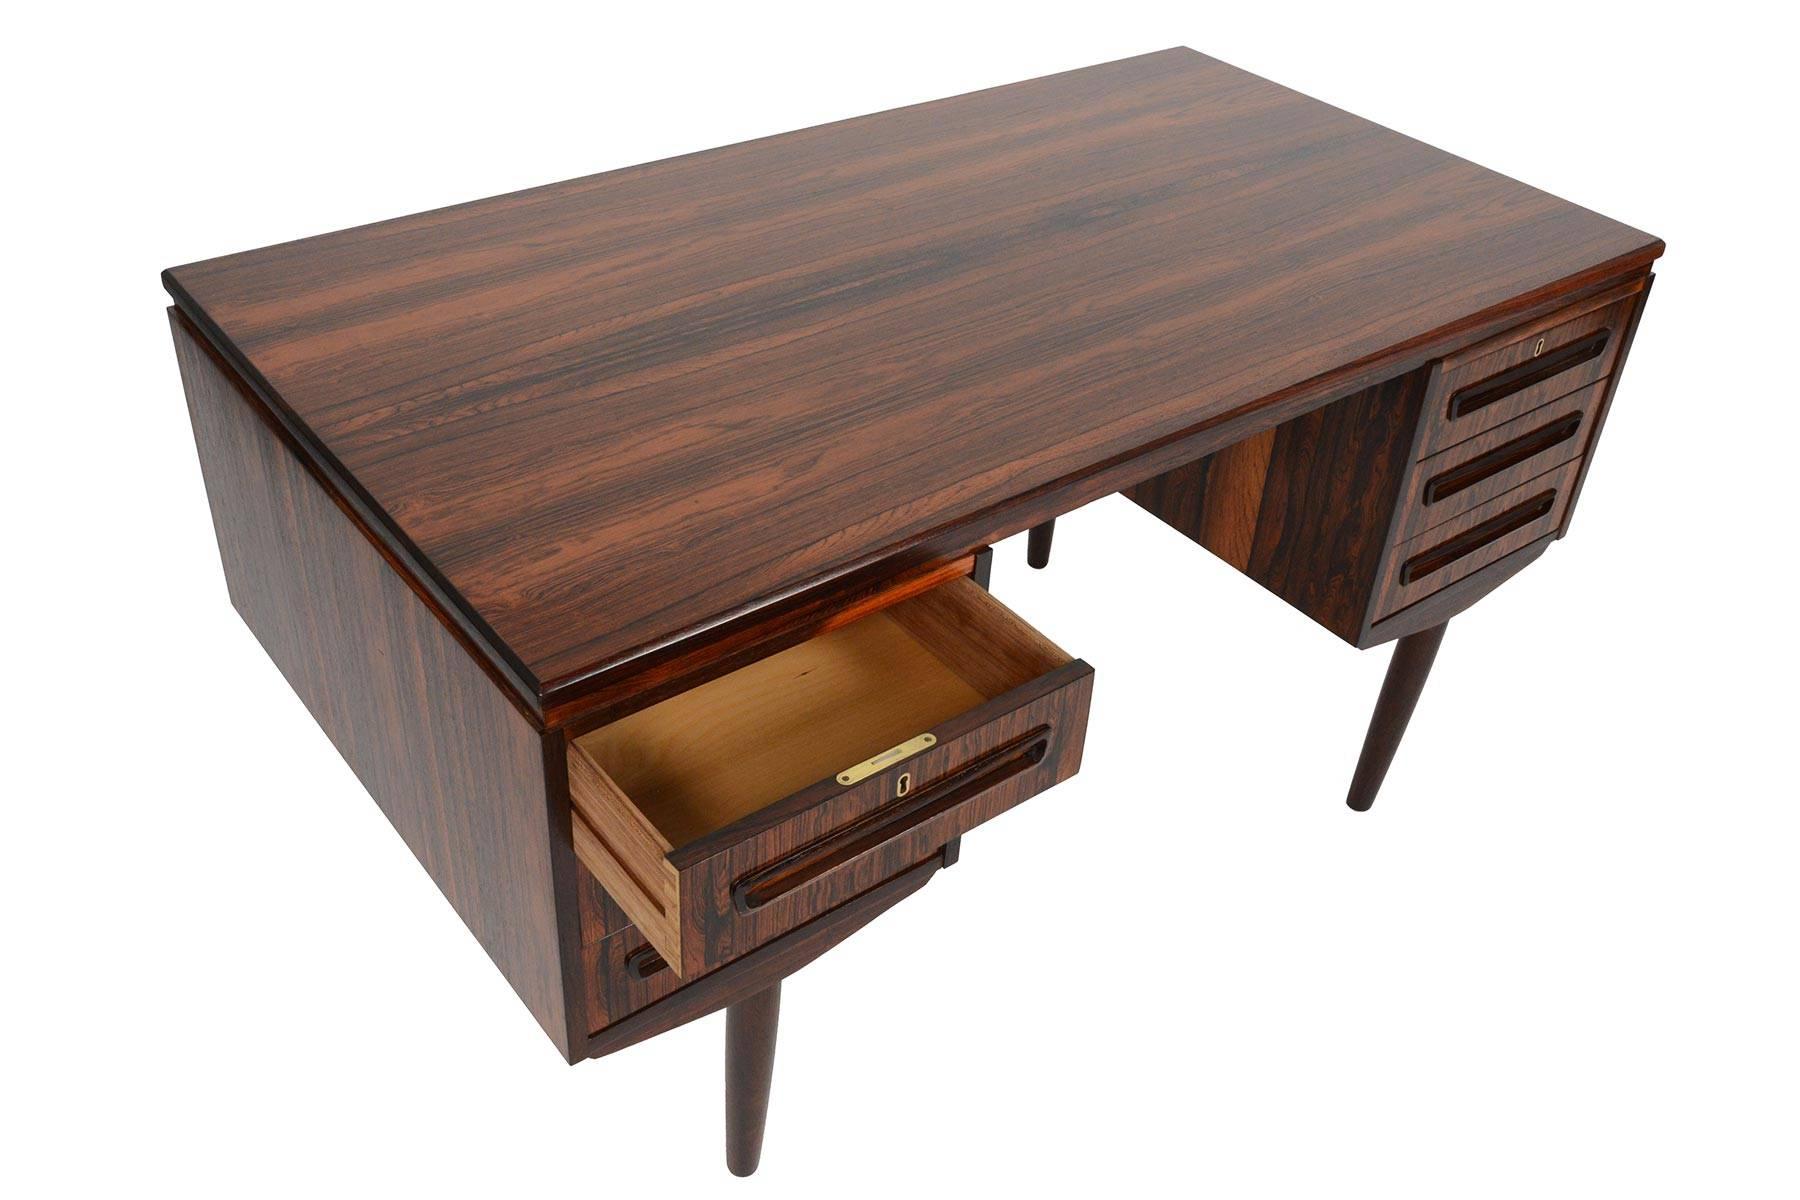 This Danish modern desk in Brazilian rosewood is a wonderfully piece for any home or office. The top of this desk features a beautiful slab of rosewood with active cathedral grain patterns. Two banks of three drawers sit on either side of the